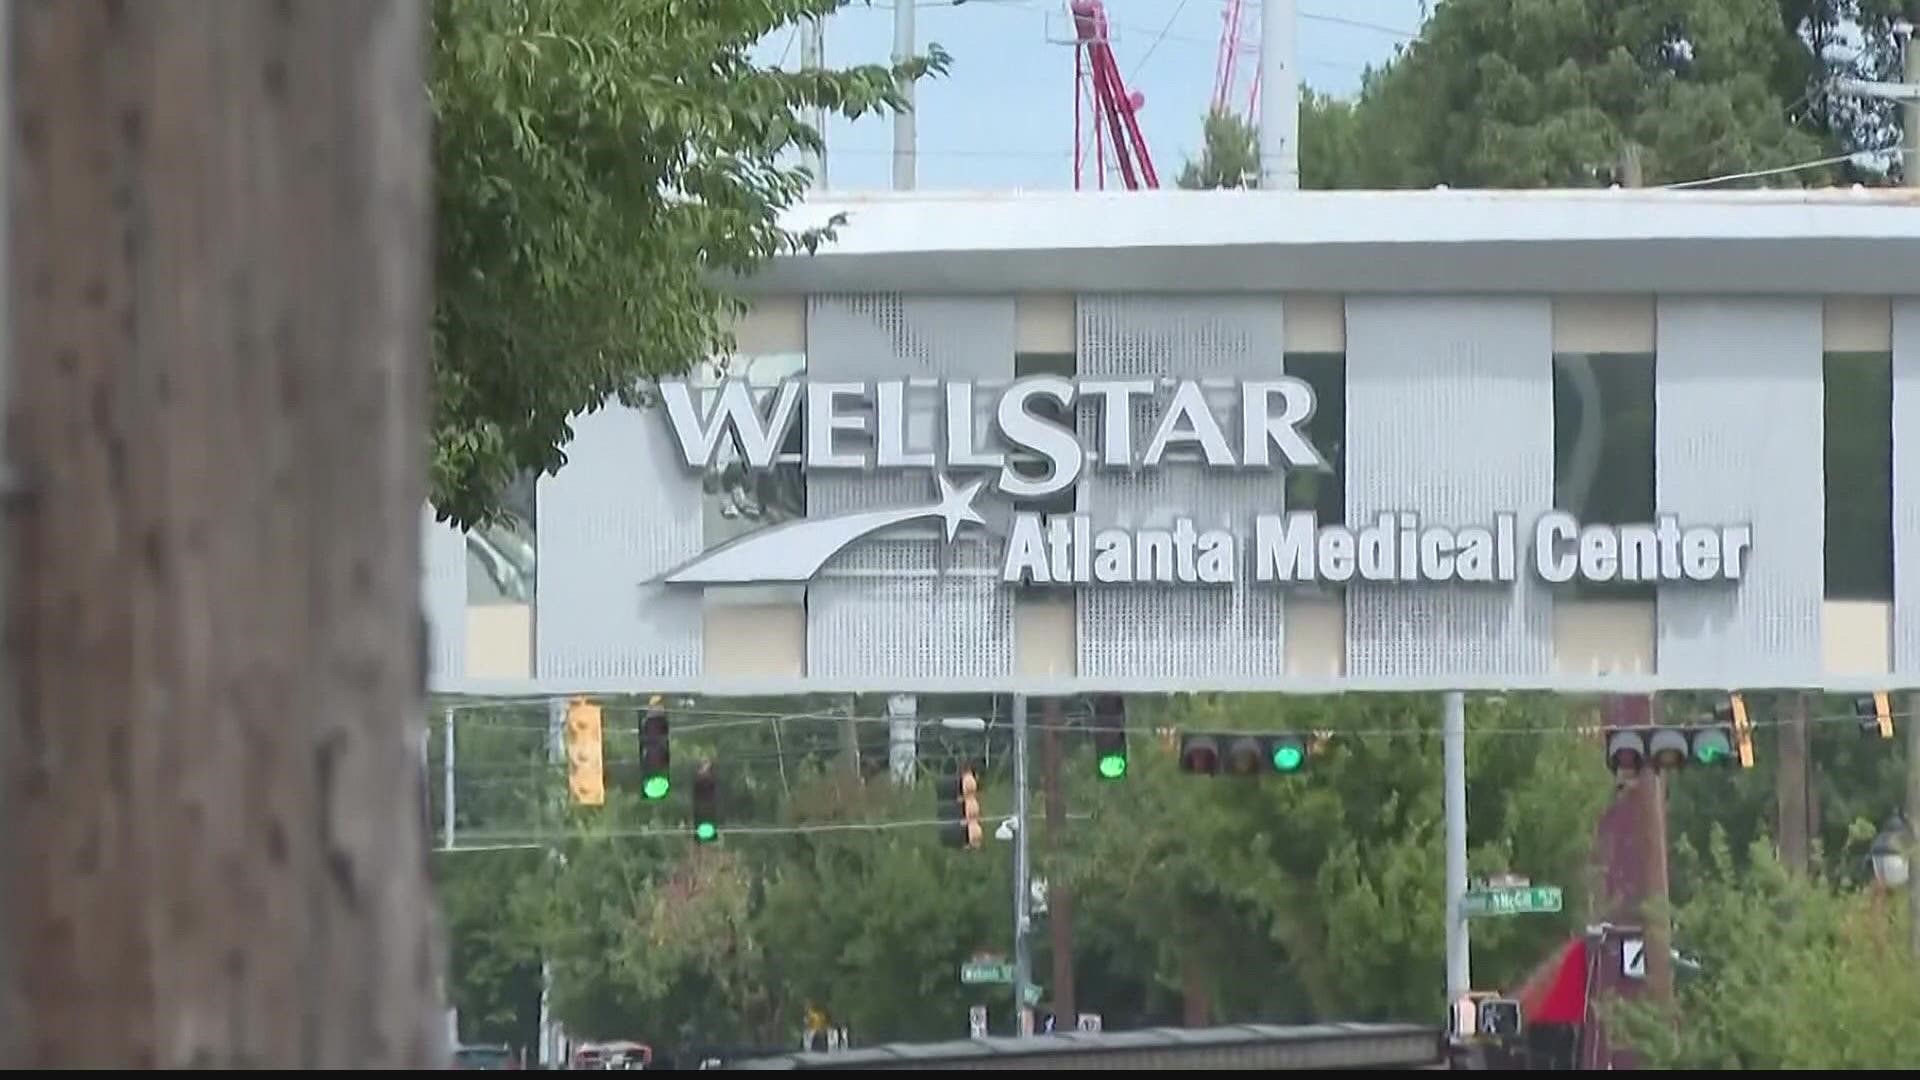 Local officials have spoken harshly about the surprise announcement by Wellstar, which will shutter one of the two Level 1 trauma centers in metro Atlanta.